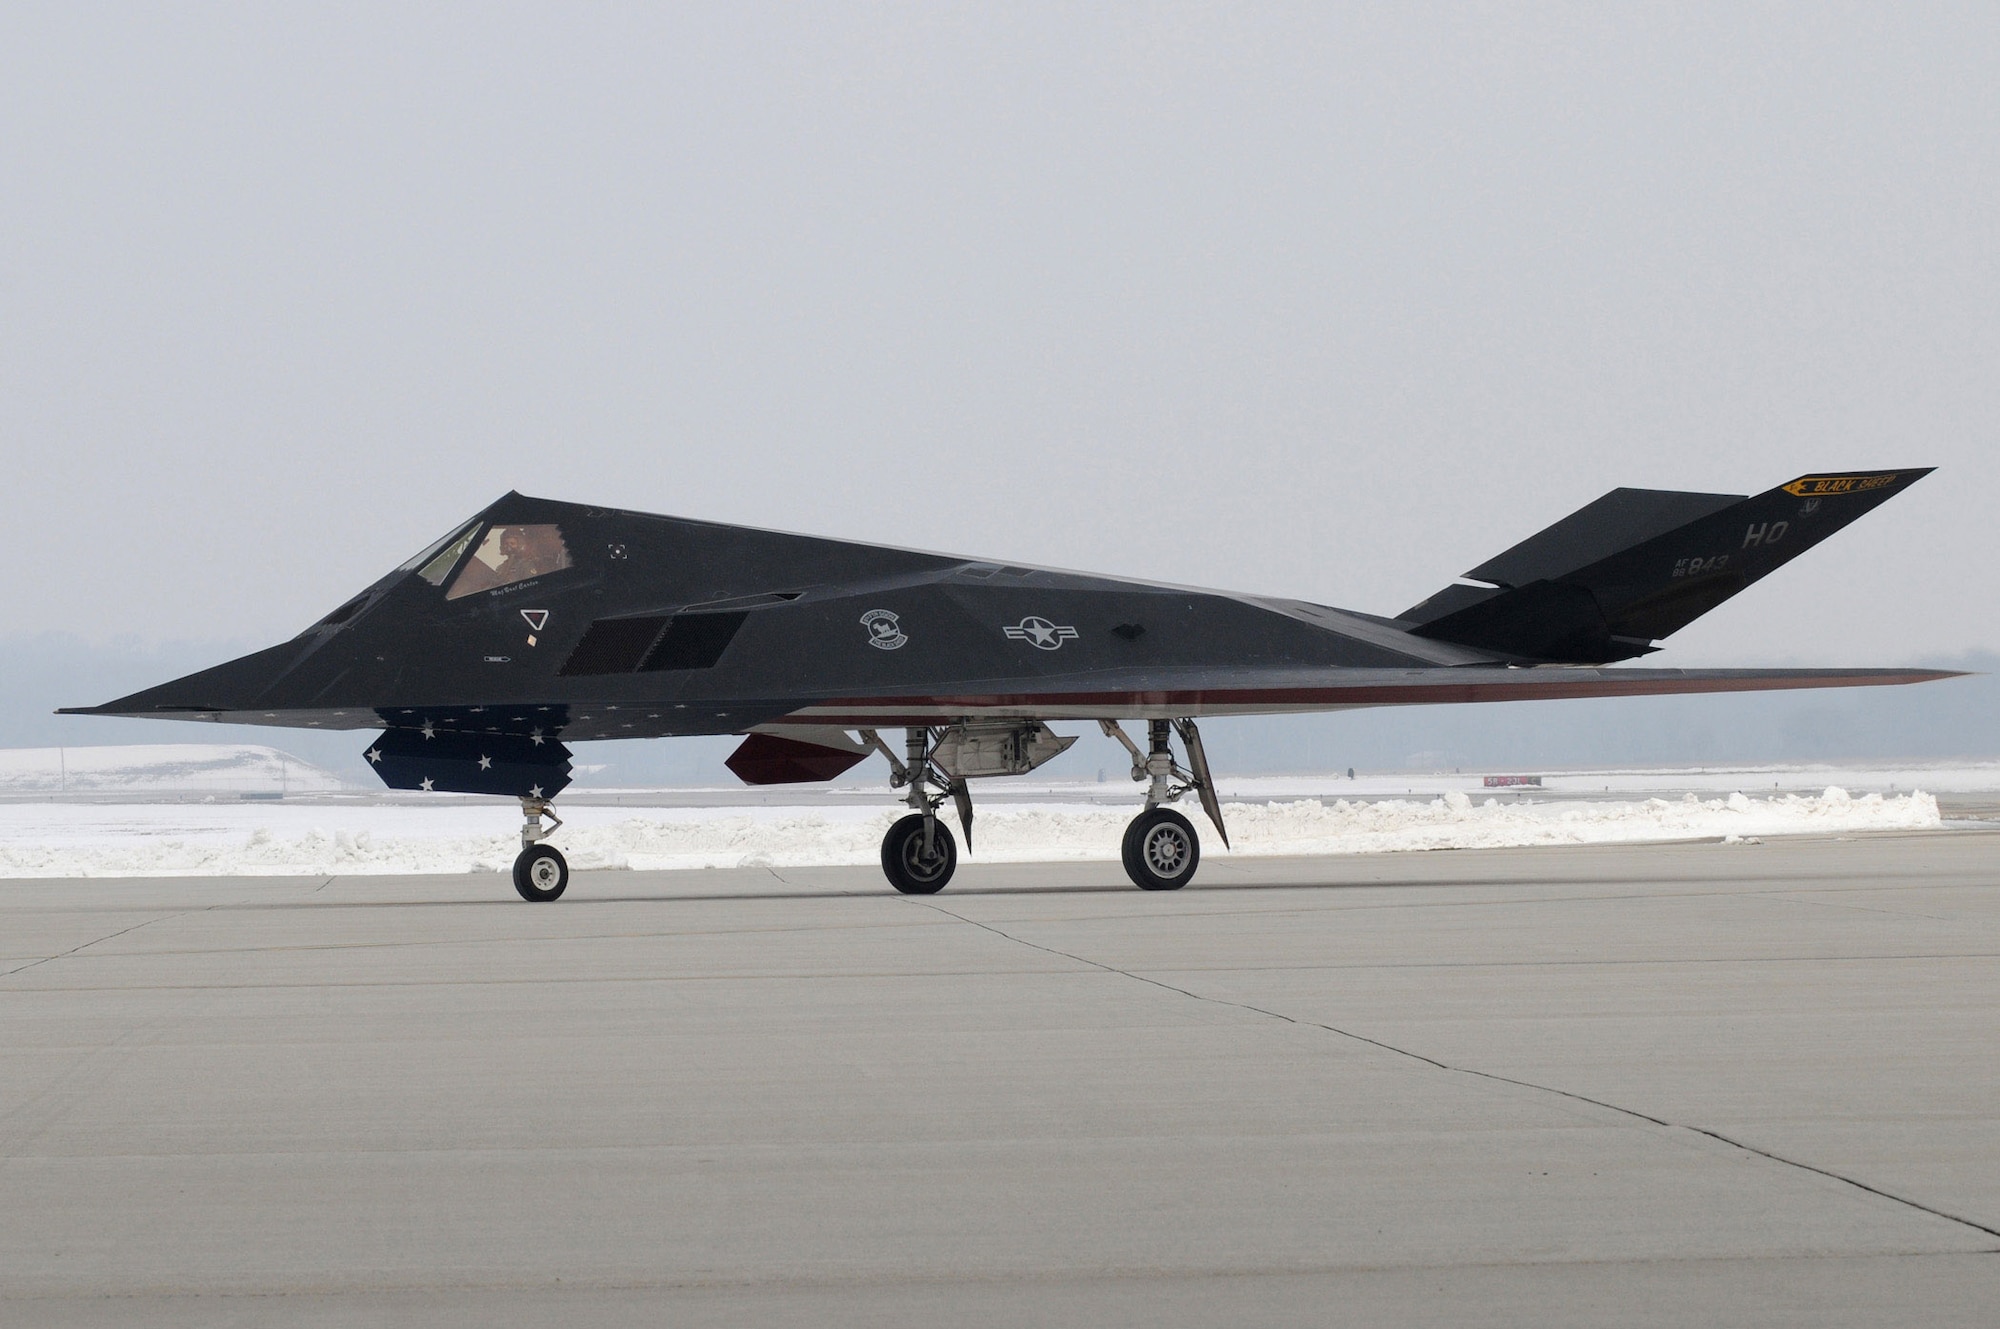 An F-117 Nighthawk taxis into position during the F-117 Nighthawk farewell ceremony at Wright-Patterson Air Force Base, Ohio, March 11. The ceremony consisted of mulitple guest speakers, a piece by the Air Force Band of Flight and concluded with a single ship flyover. (U.S. Air Force photo/Staff Sgt Joshua Strang)